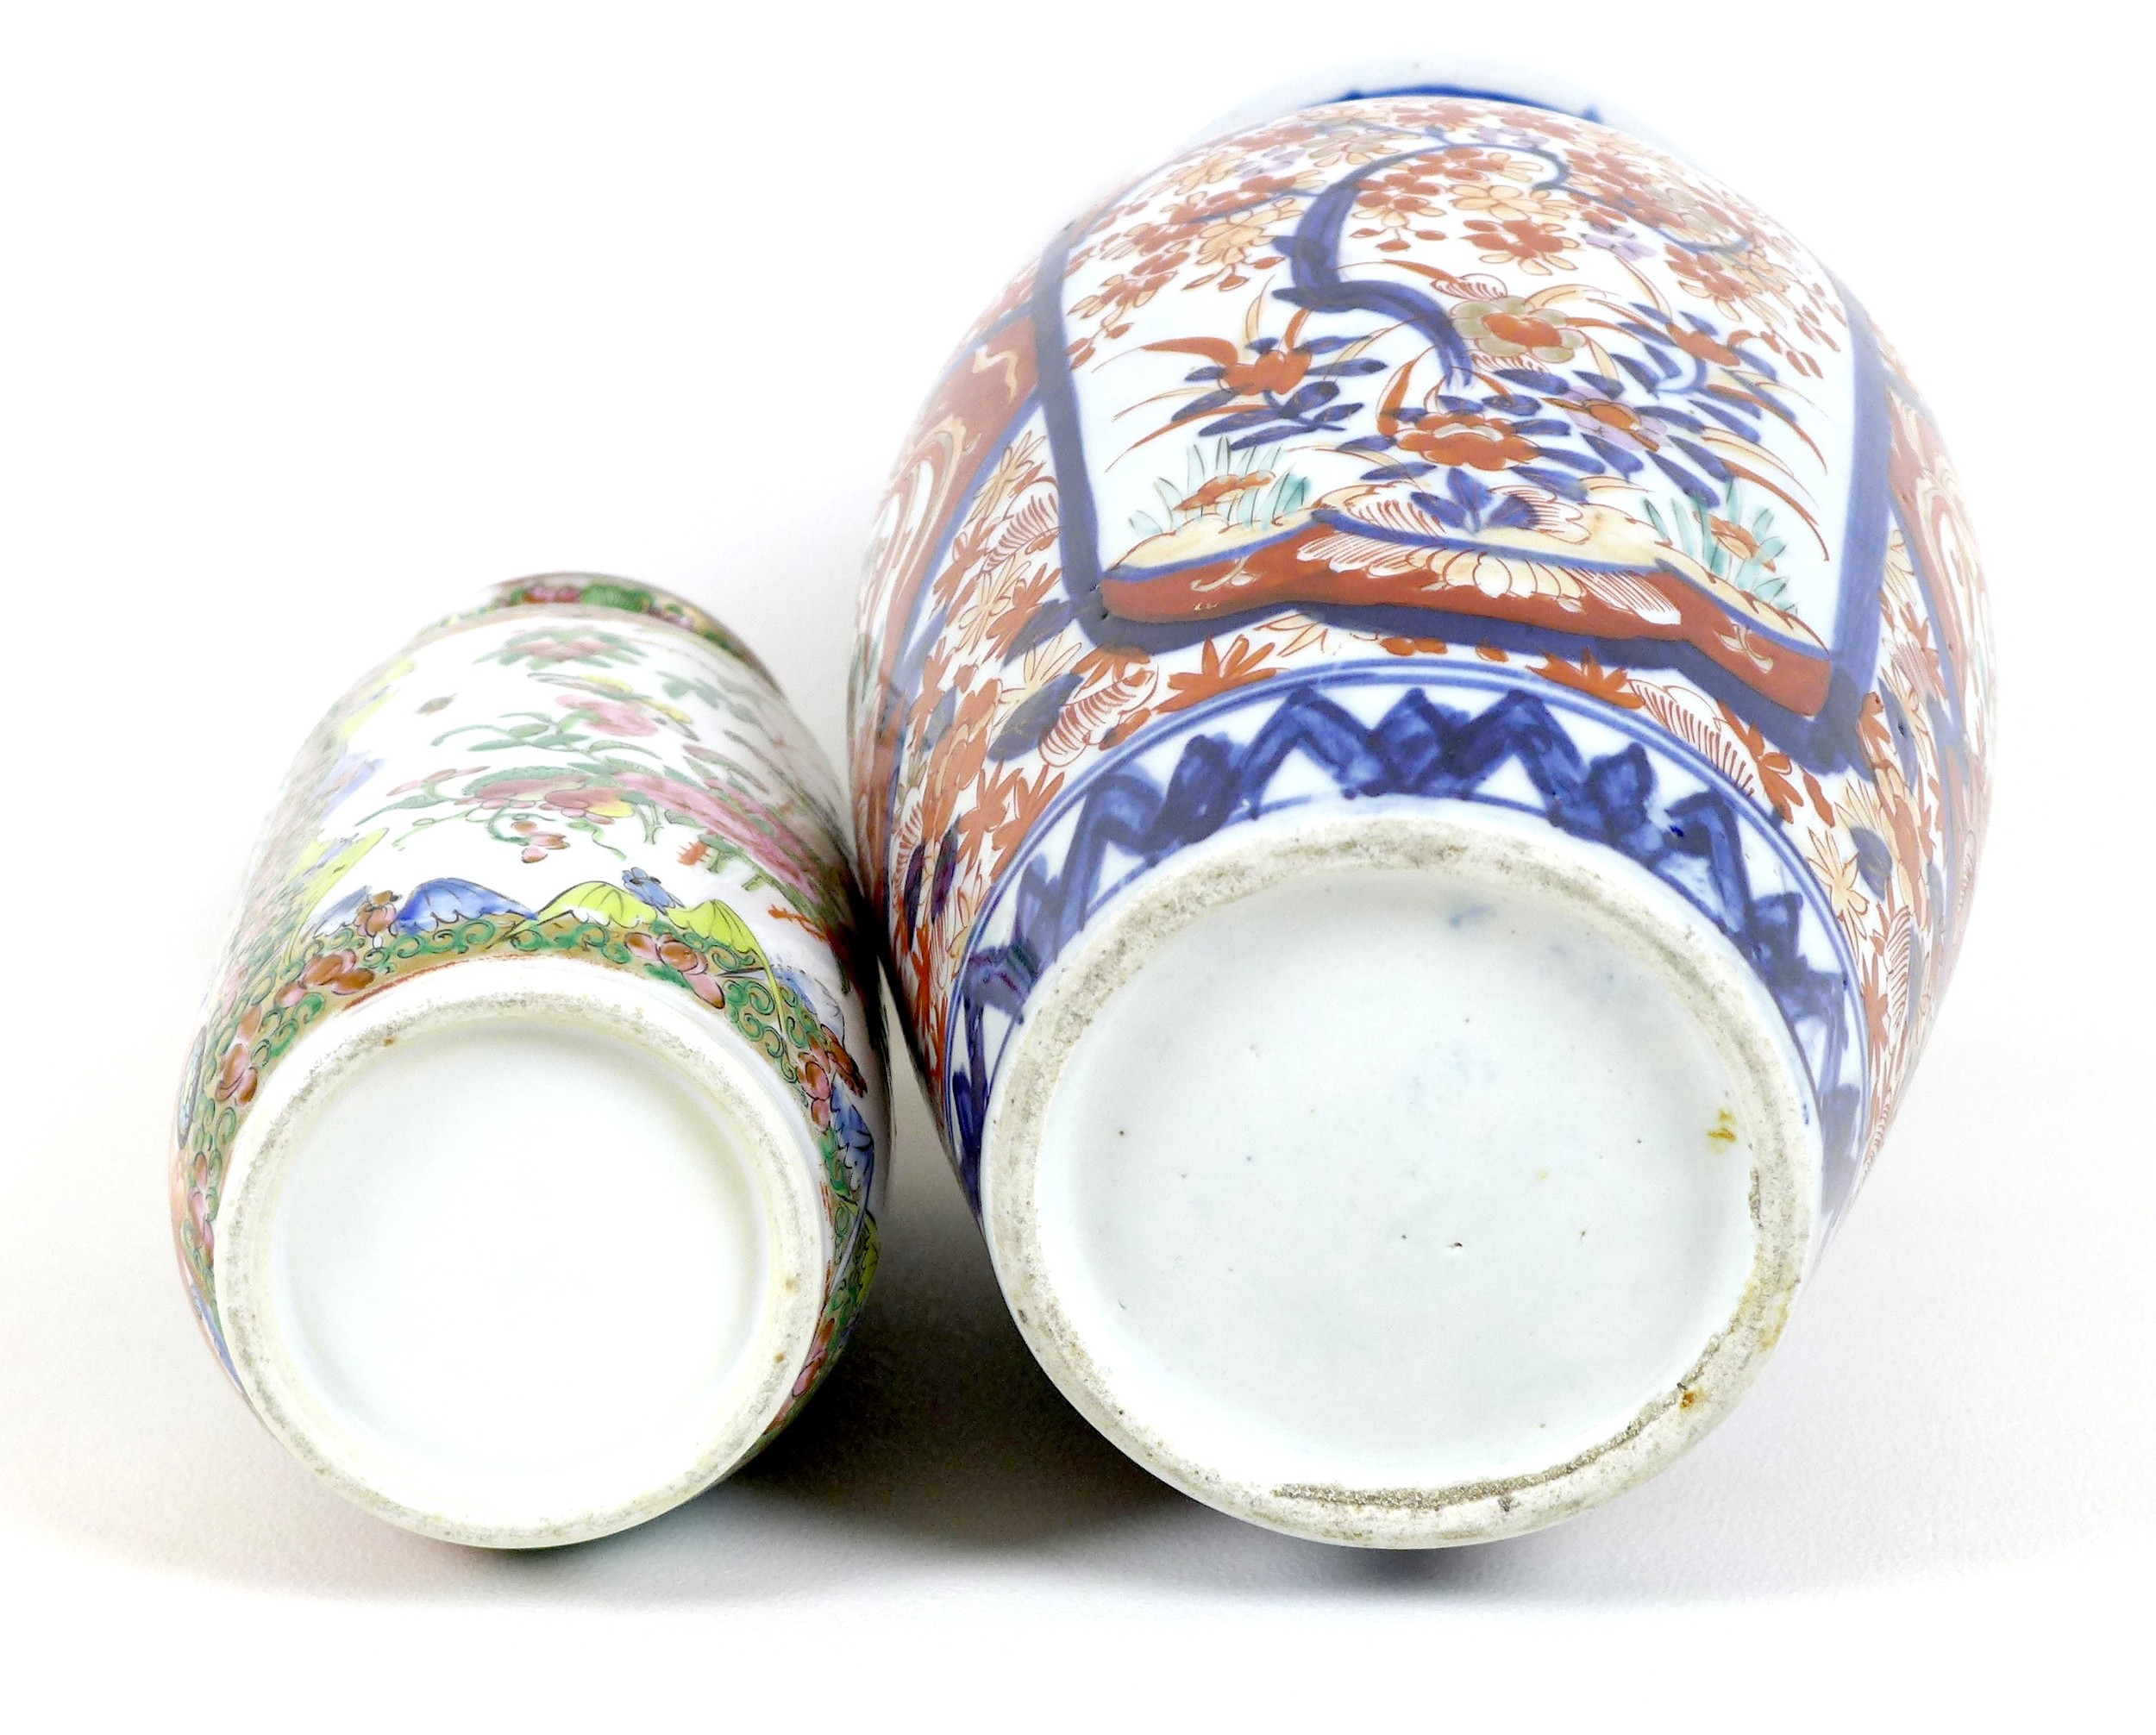 A Canton porcelain vase, Qing Dynasty, late 19th century, typically decorated with reserves of - Image 4 of 14